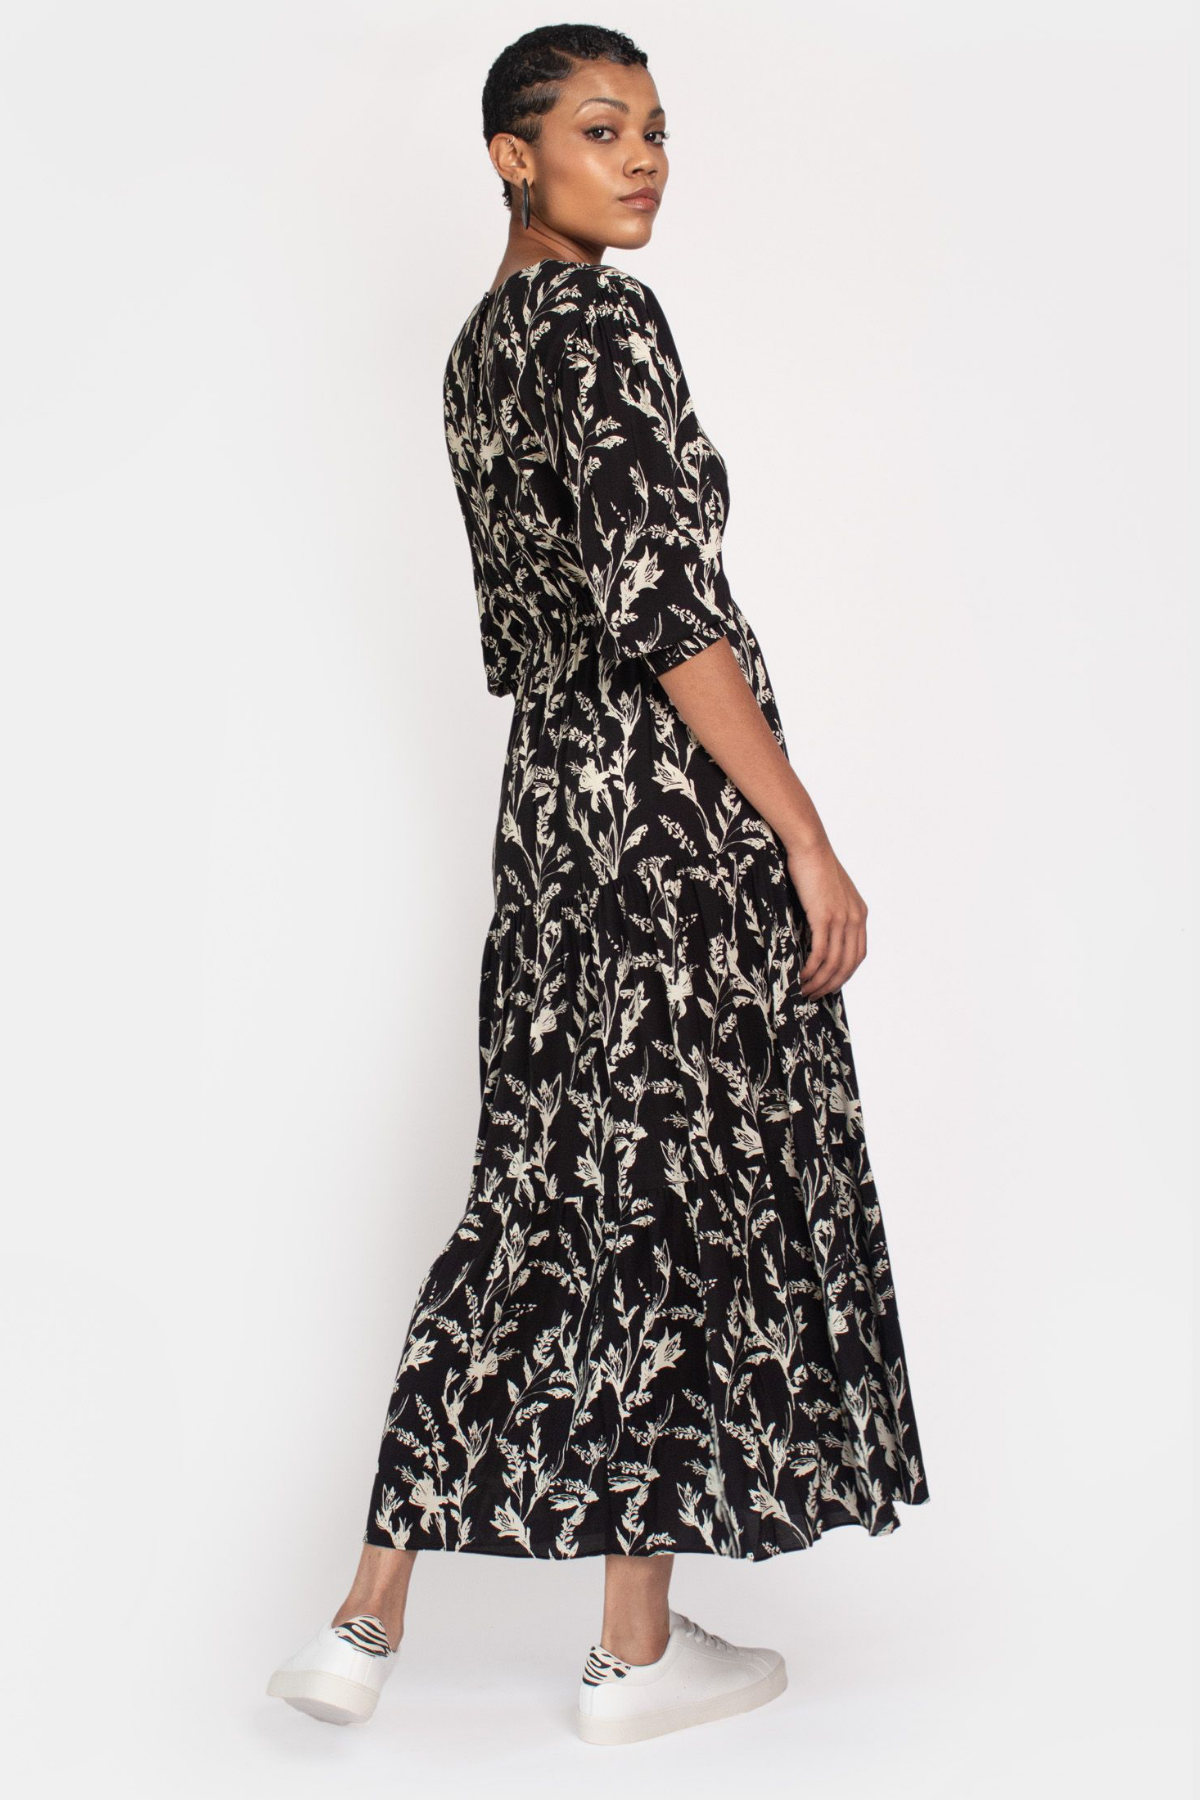 Hide the Label Kalmia Maxi in Black & White Sketch Floral, available in ZERRIN